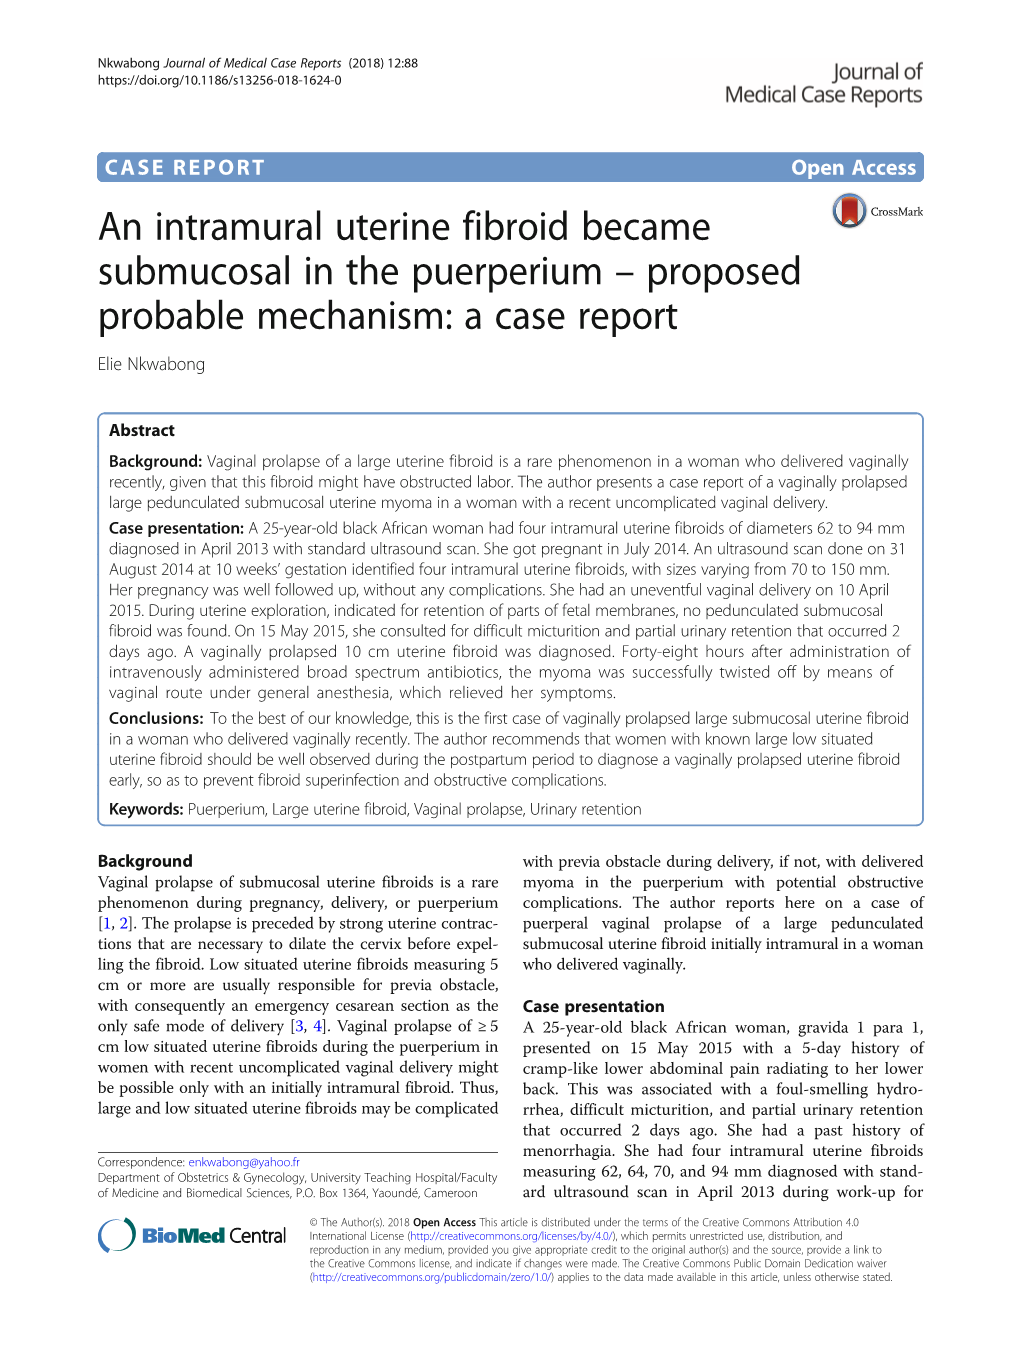 An Intramural Uterine Fibroid Became Submucosal in the Puerperium – Proposed Probable Mechanism: a Case Report Elie Nkwabong